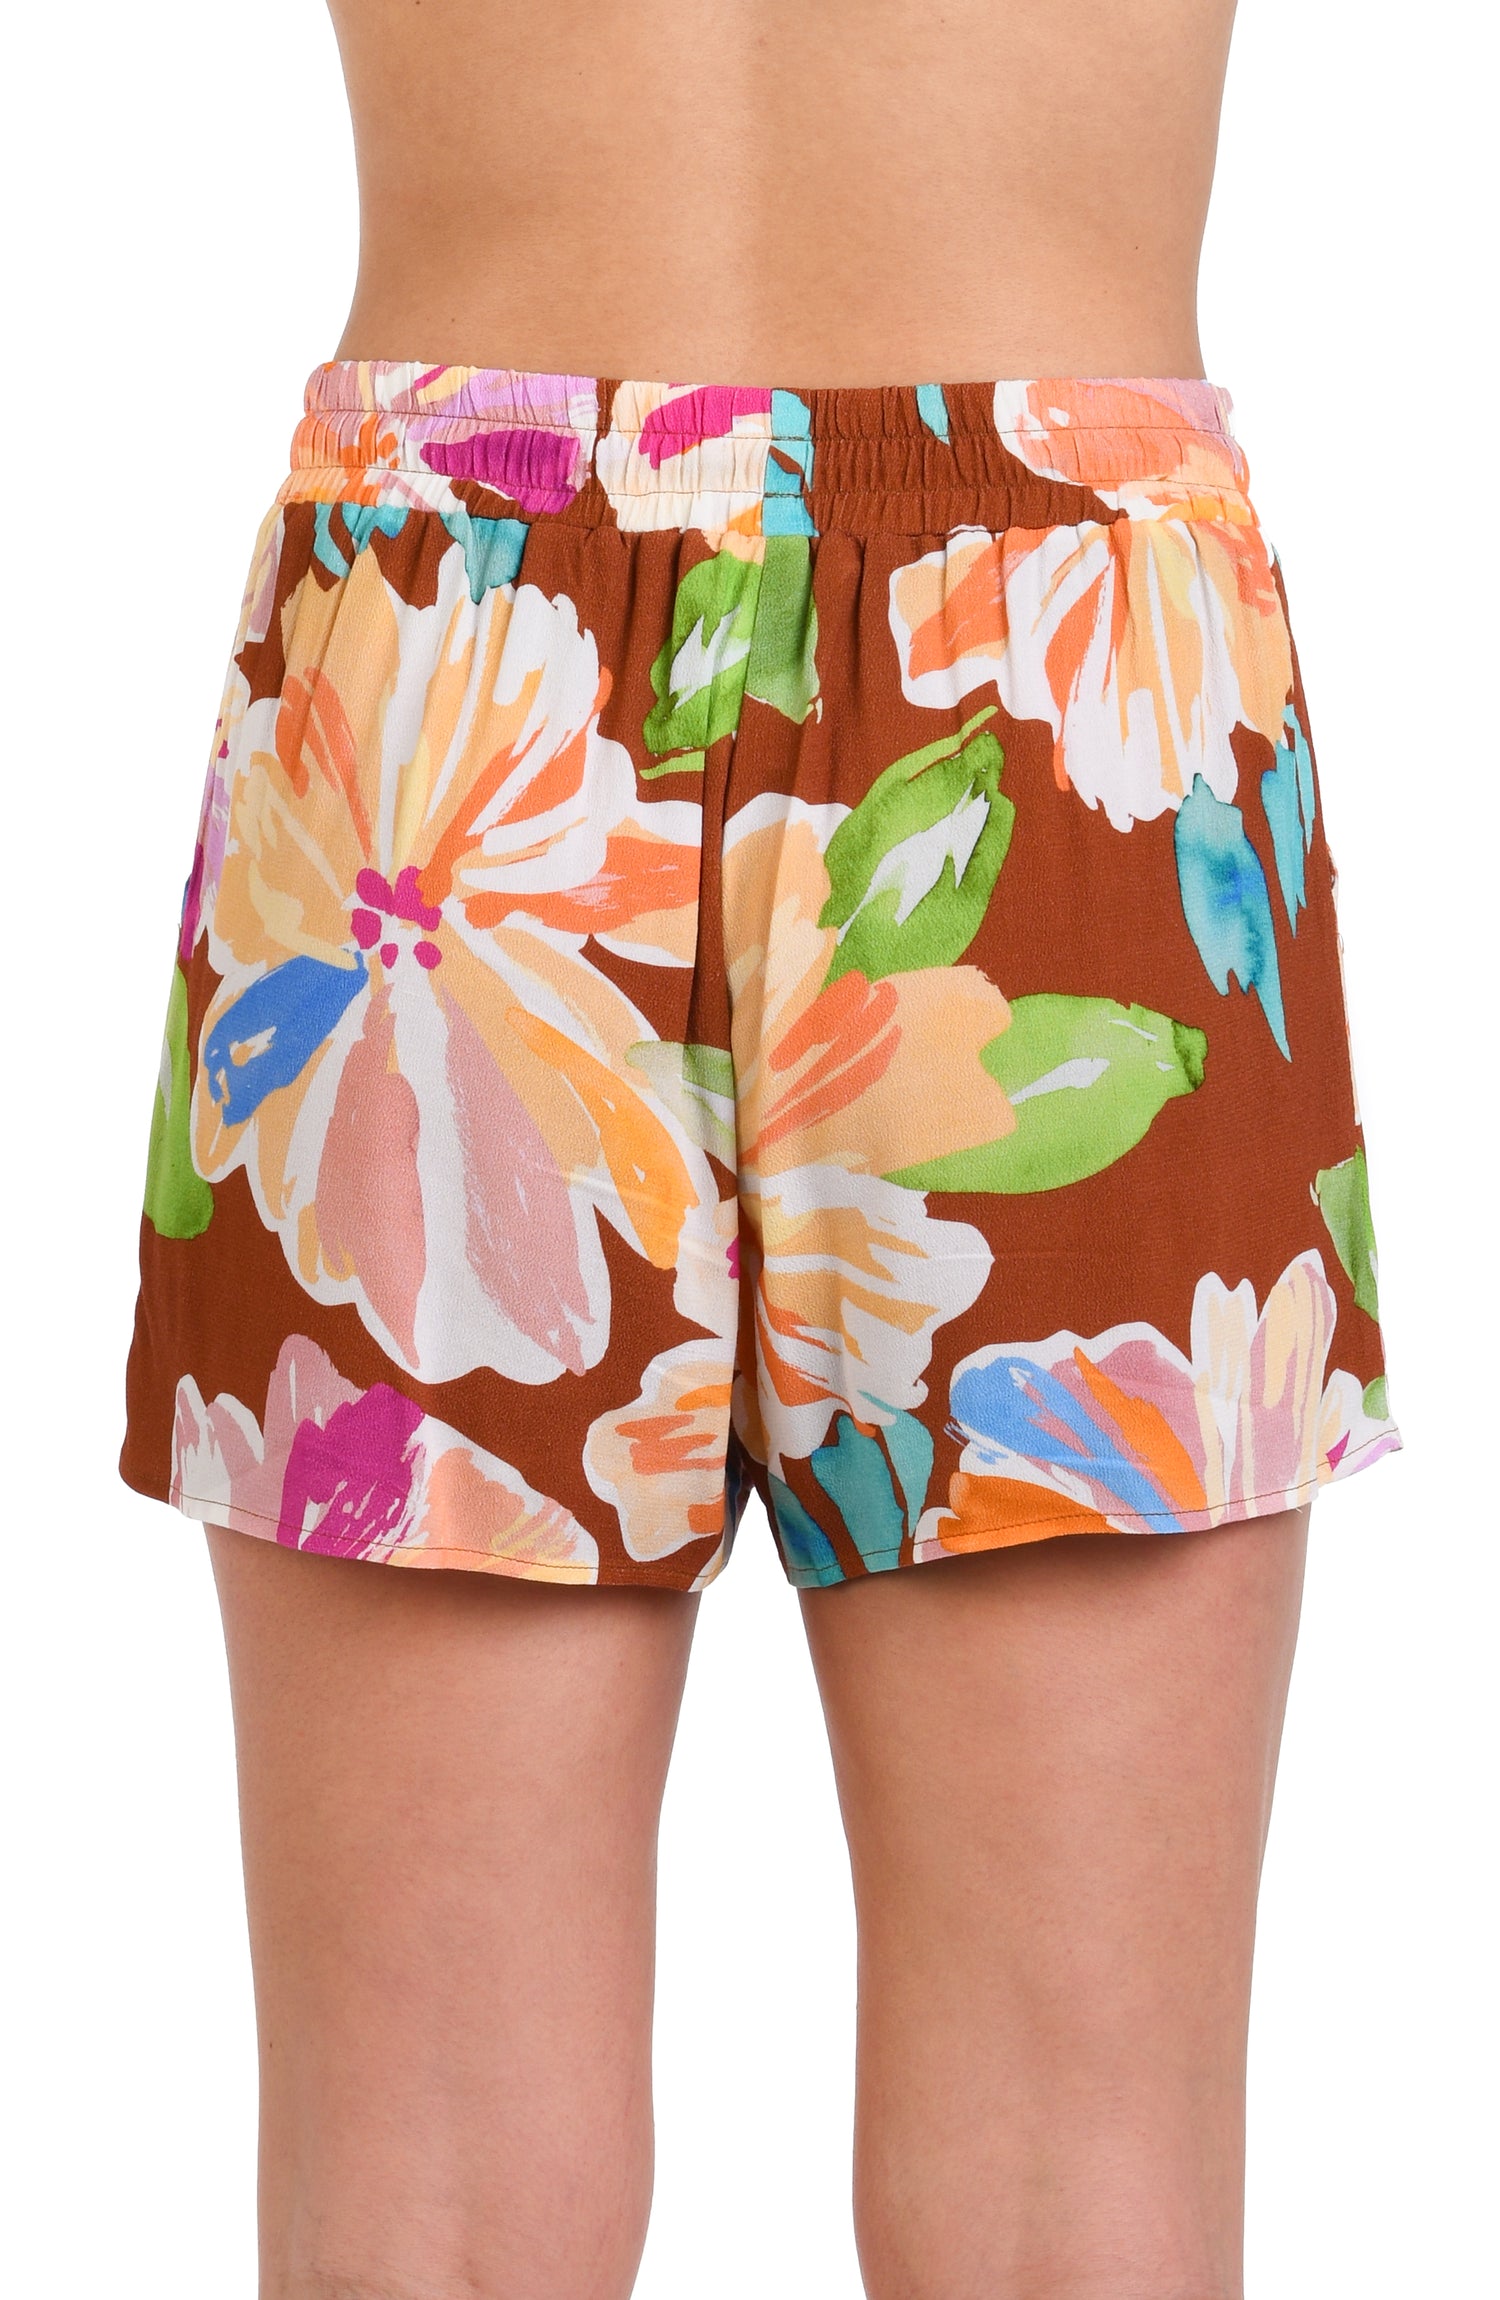 Model is wearing floral patterned beach short swimsuit cover up with bold strokes of peach, pink, orange, and blue hues on a rich brown background.